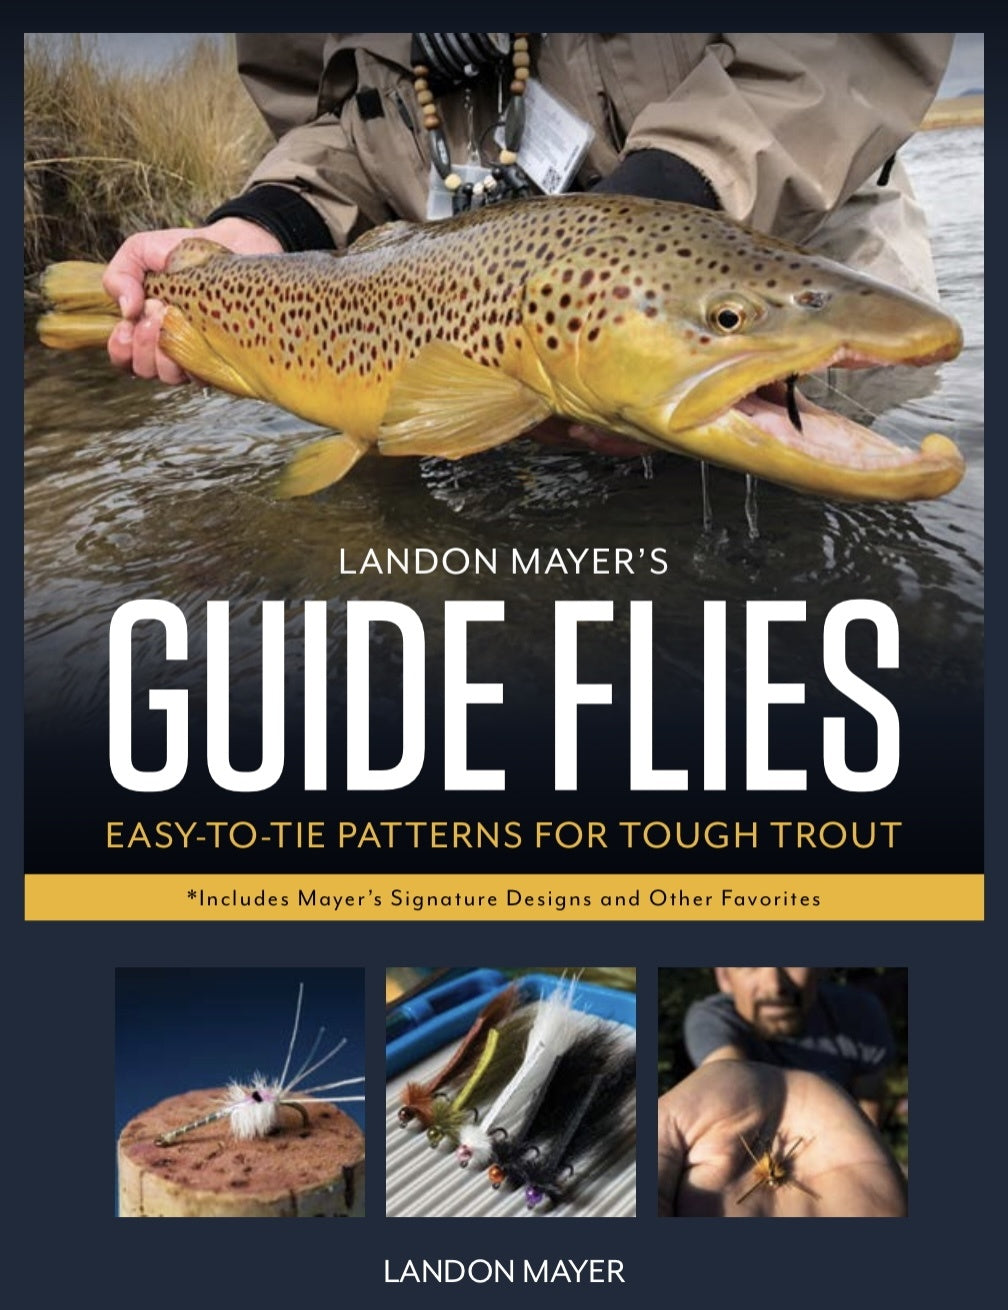 Landon Mayer's Guide Flies: Easy-To-Tie Patterns for Tough Trout [Book]